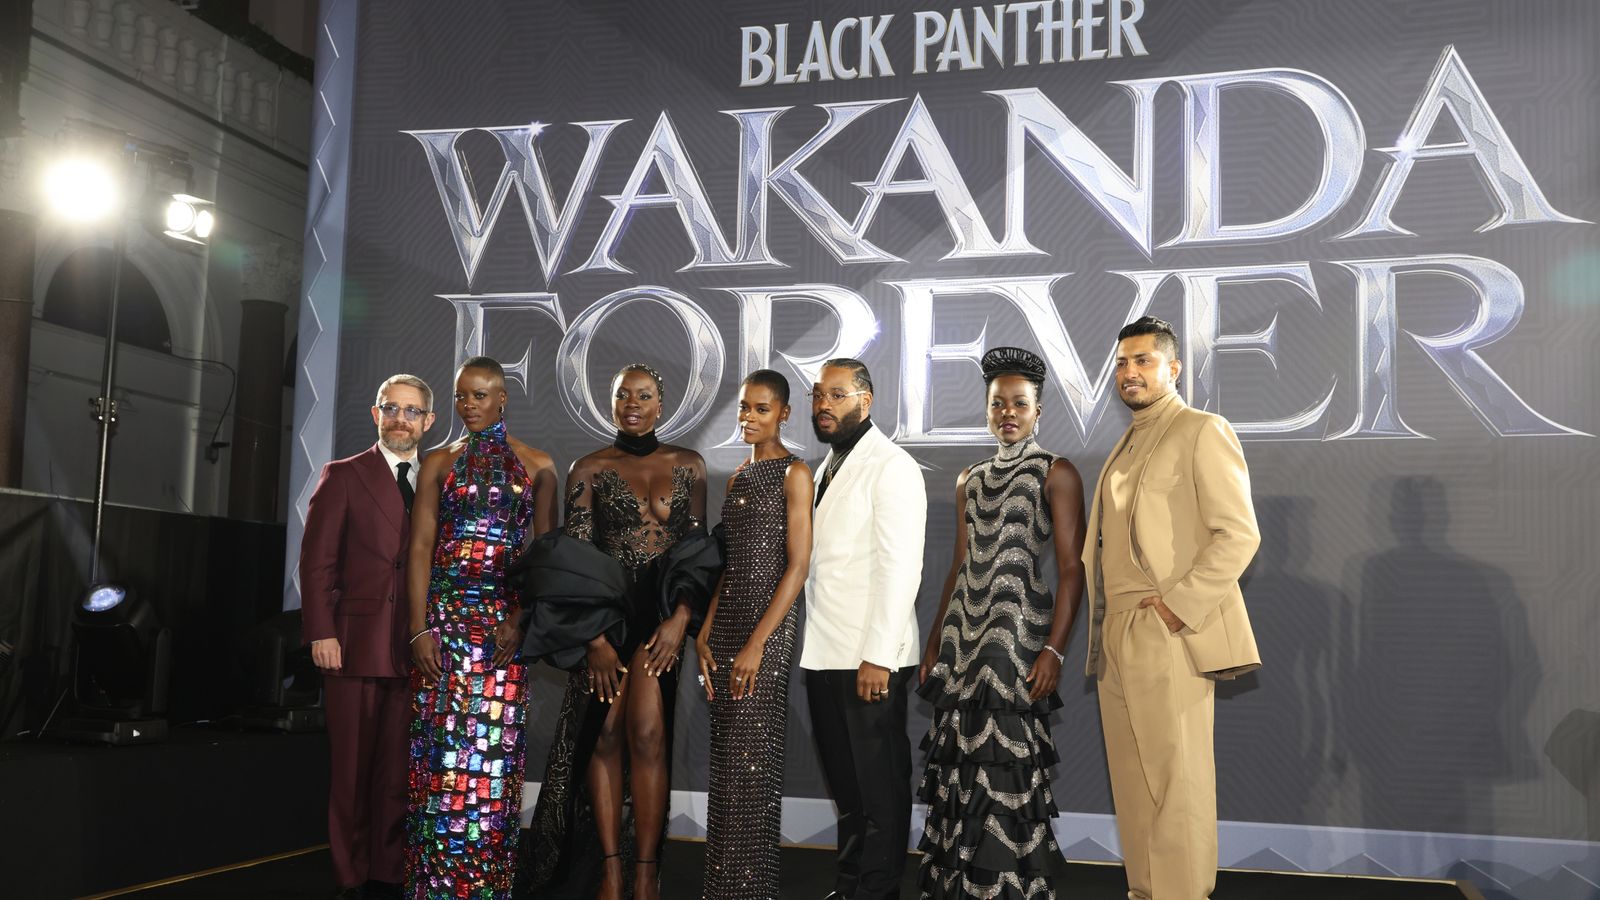 Wakanda Forever: Stars of Black Panther sequel say they hope actor Chadwick Boseman 'would be proud'